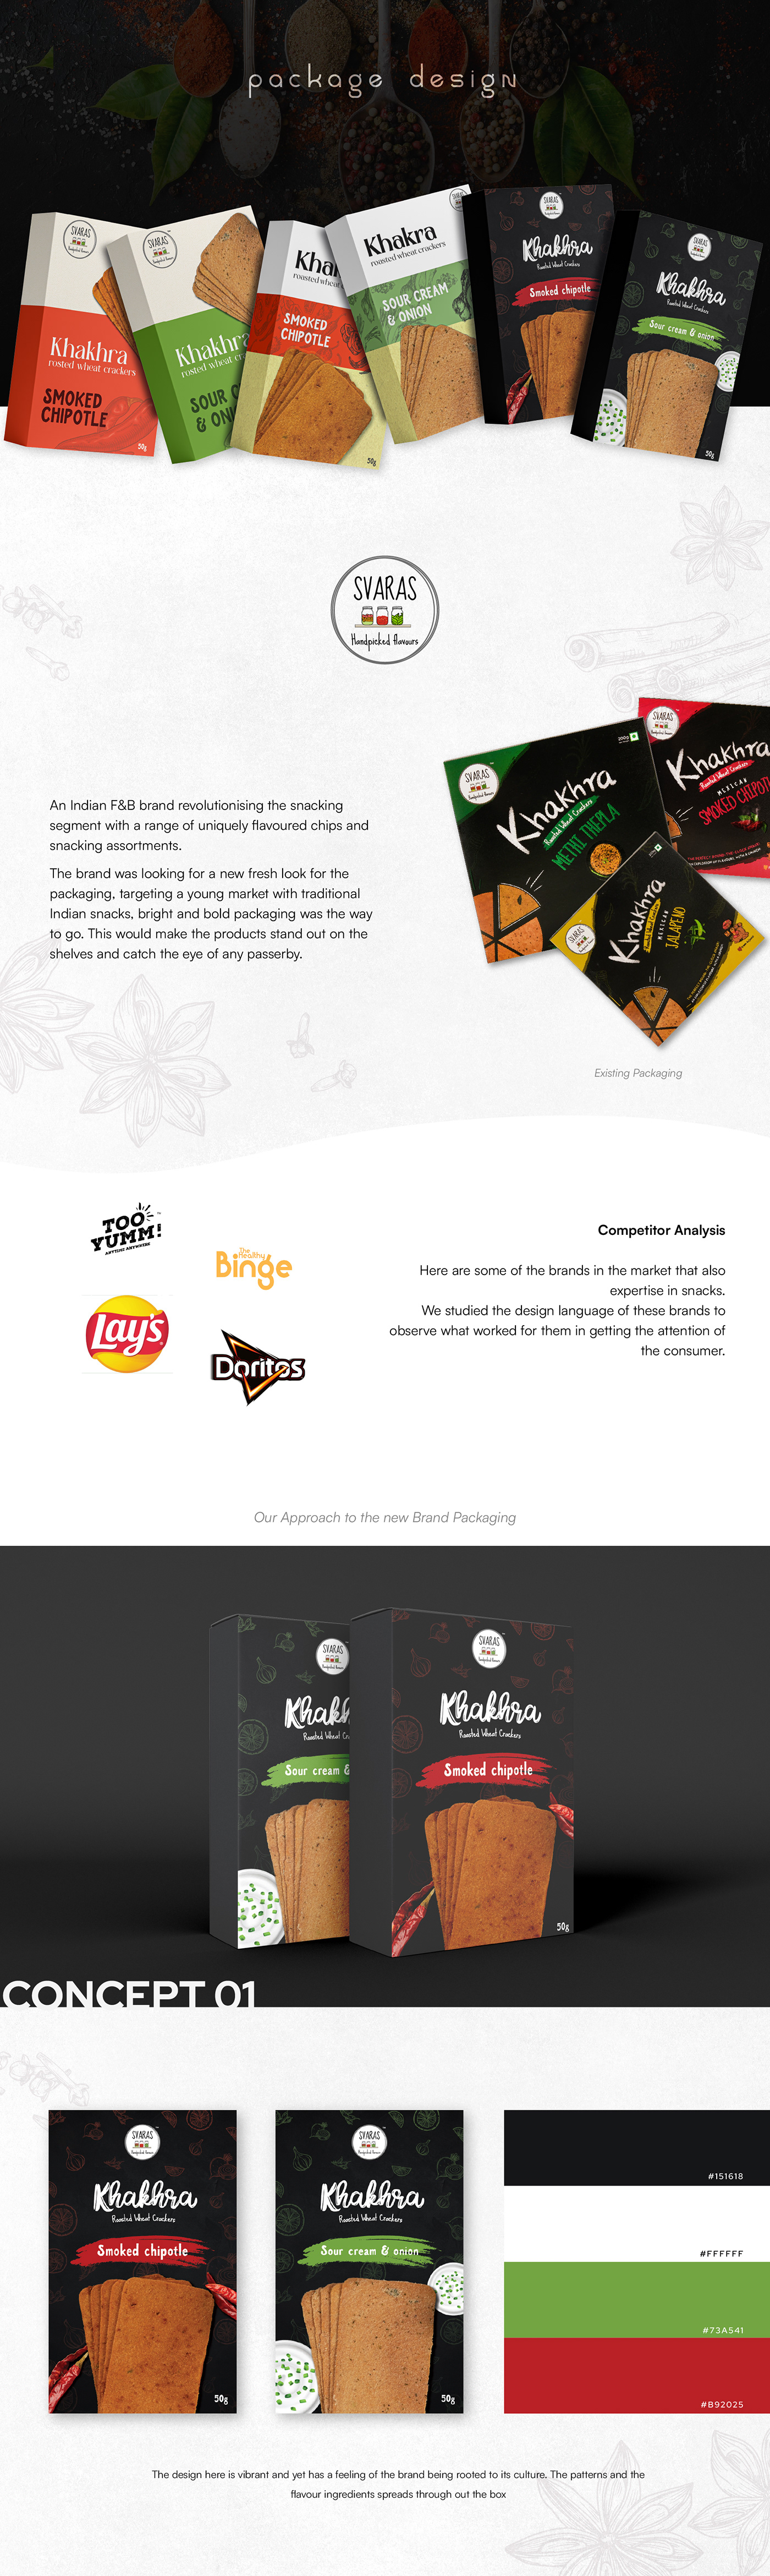 design graphic design  package package design  visual identity